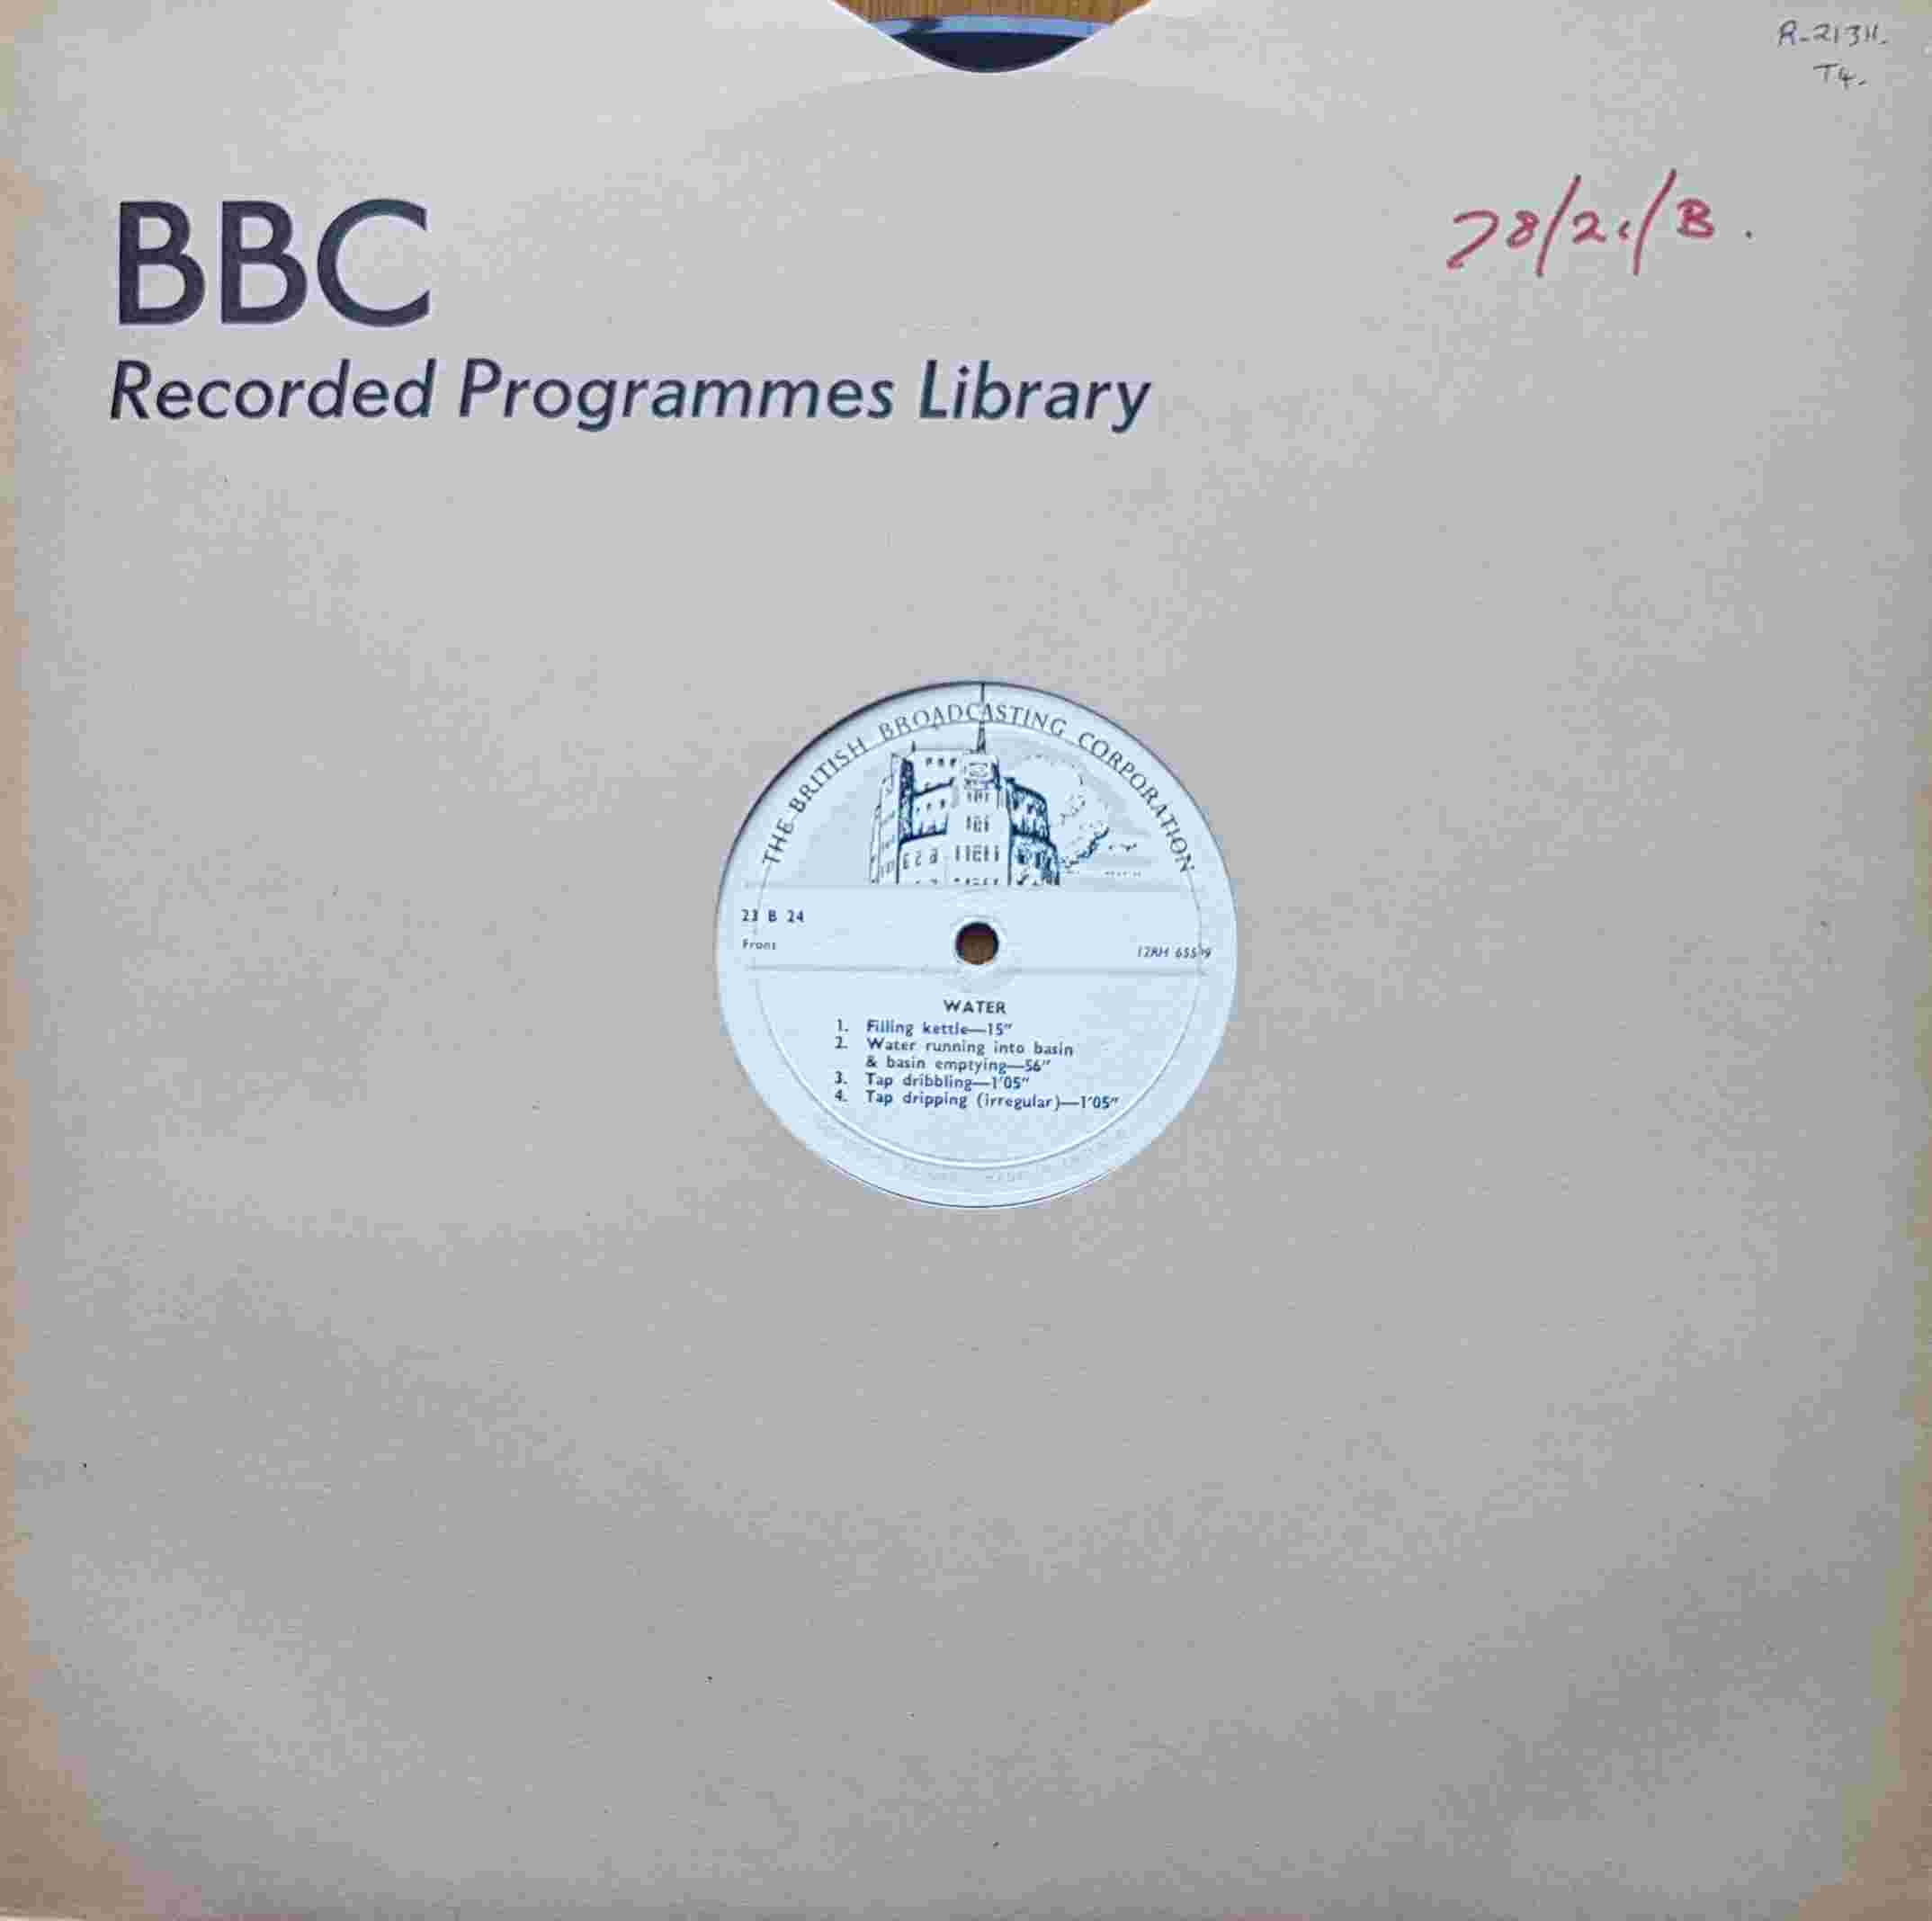 Picture of 23 B 24 Water by artist Not registered from the BBC records and Tapes library